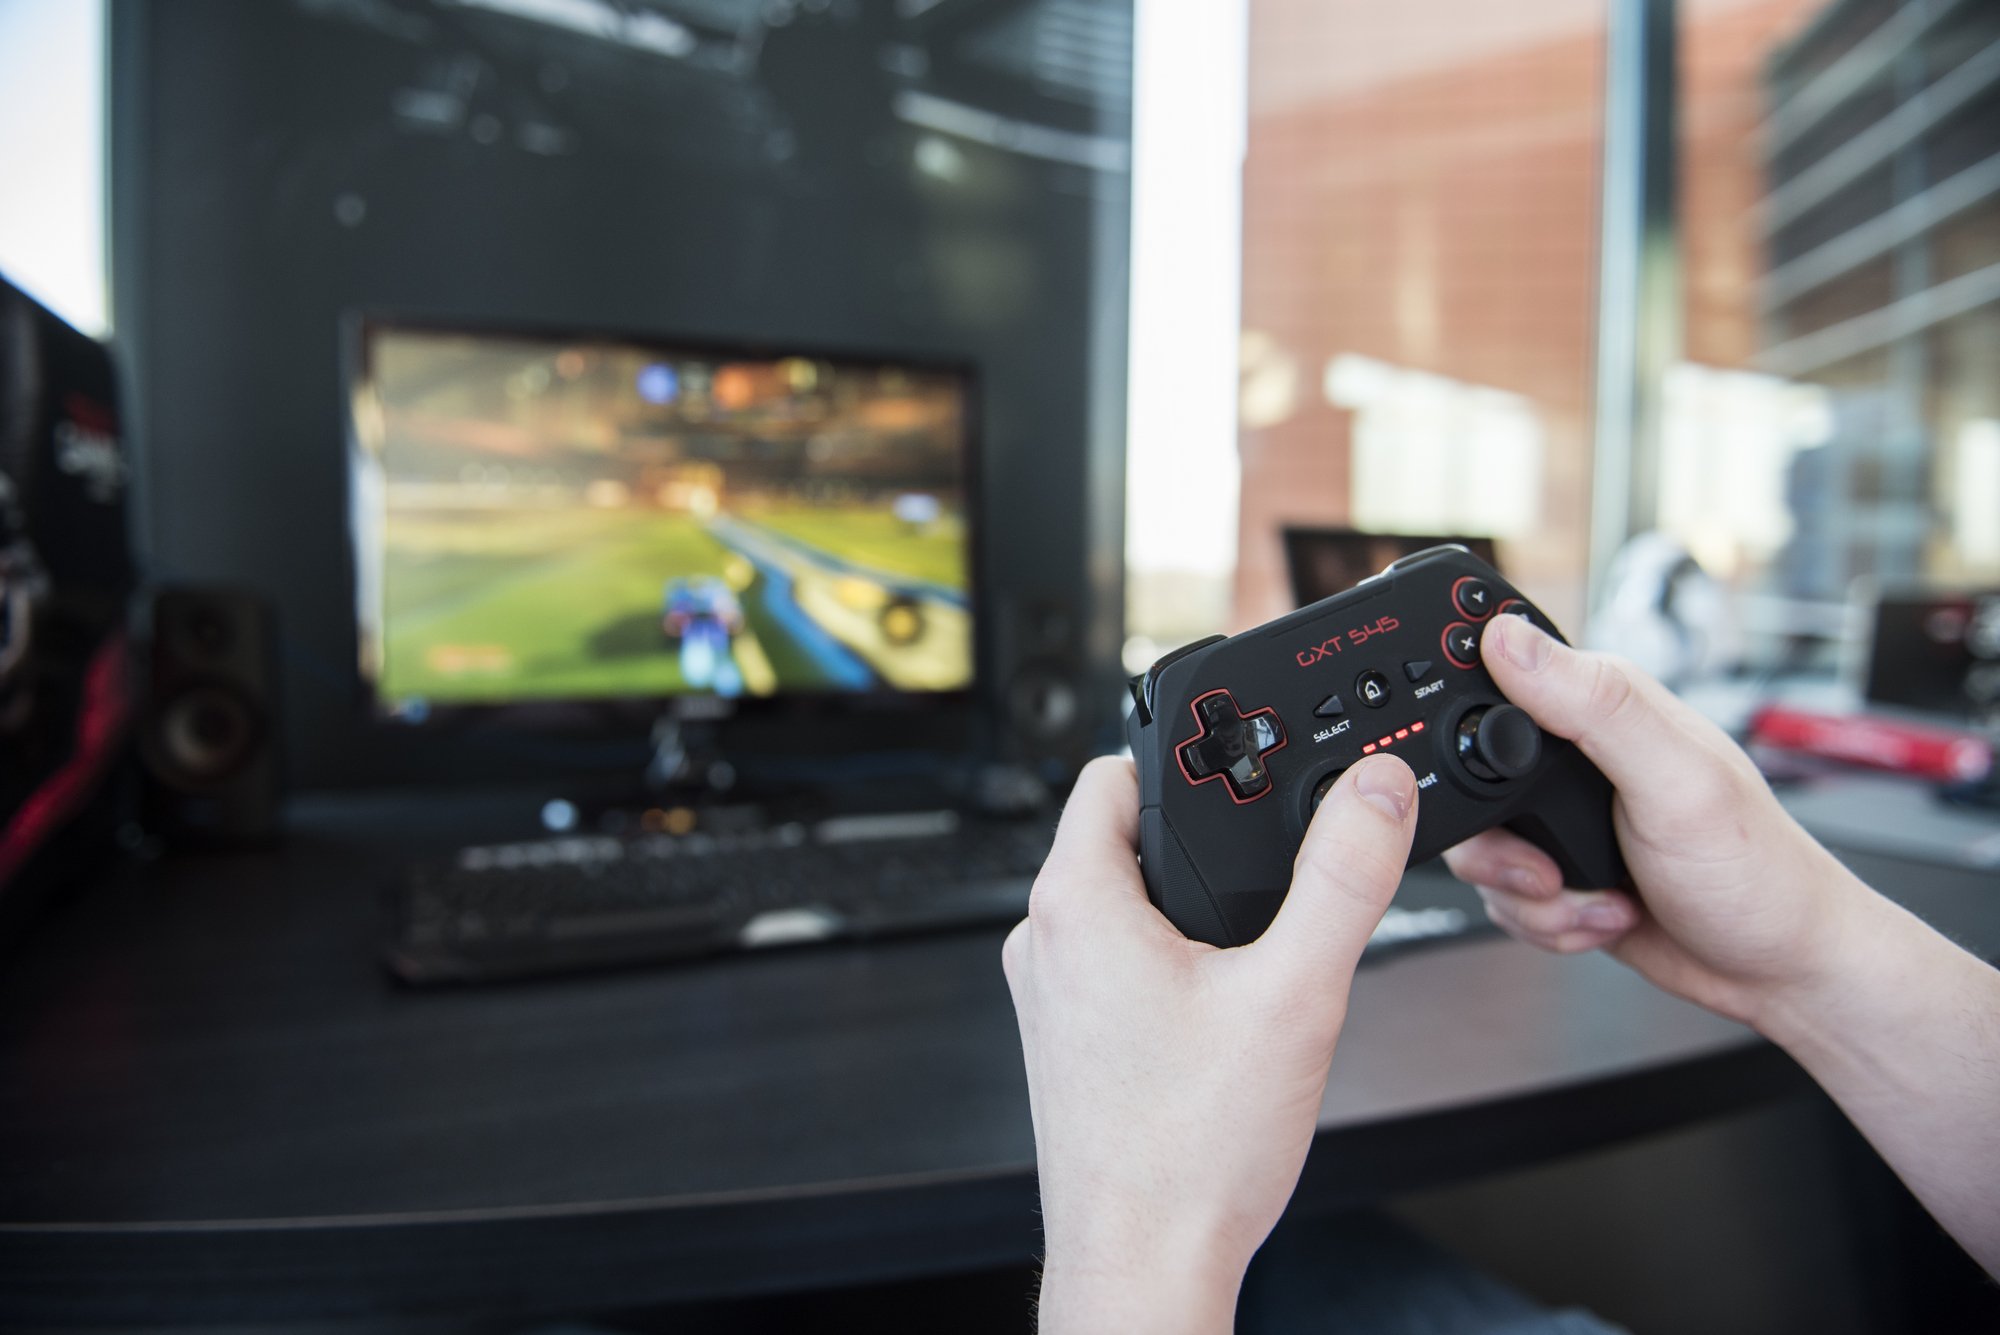 wastafel B.C. Incubus Trust Gaming on Twitter: "The GXT 545 is a great wireless gamepad for the  PC! Enjoy this with Rocket League, racing or fighting games!  https://t.co/detFiRj8fQ" / Twitter